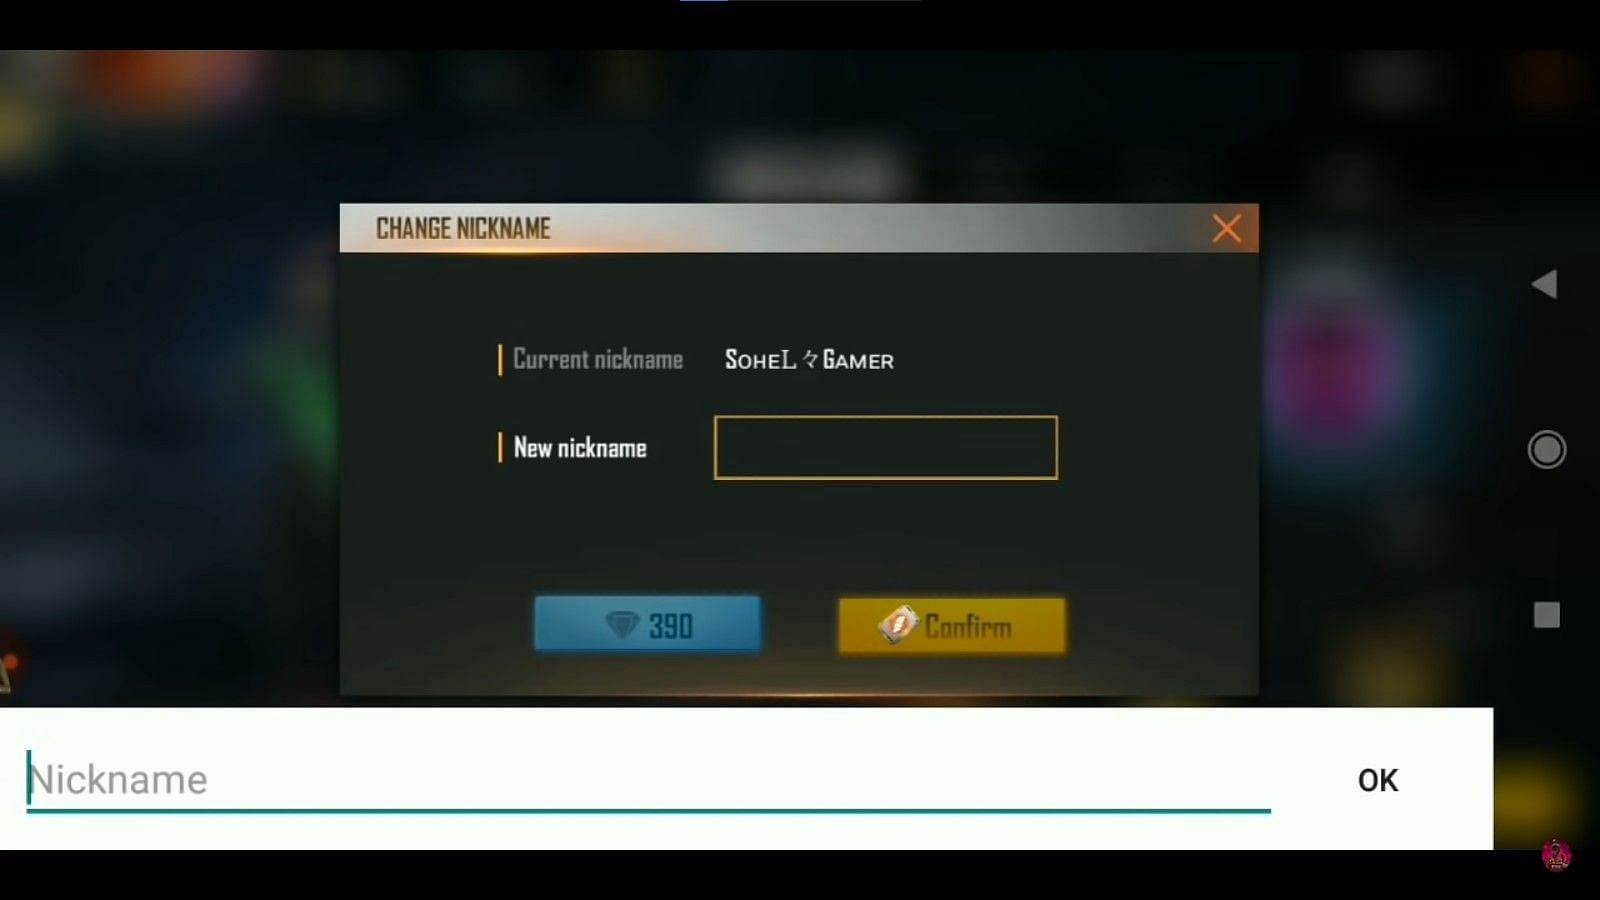 The name change card can be obtained via the redeem store (Image via SOHEL GAMER/YouTube)